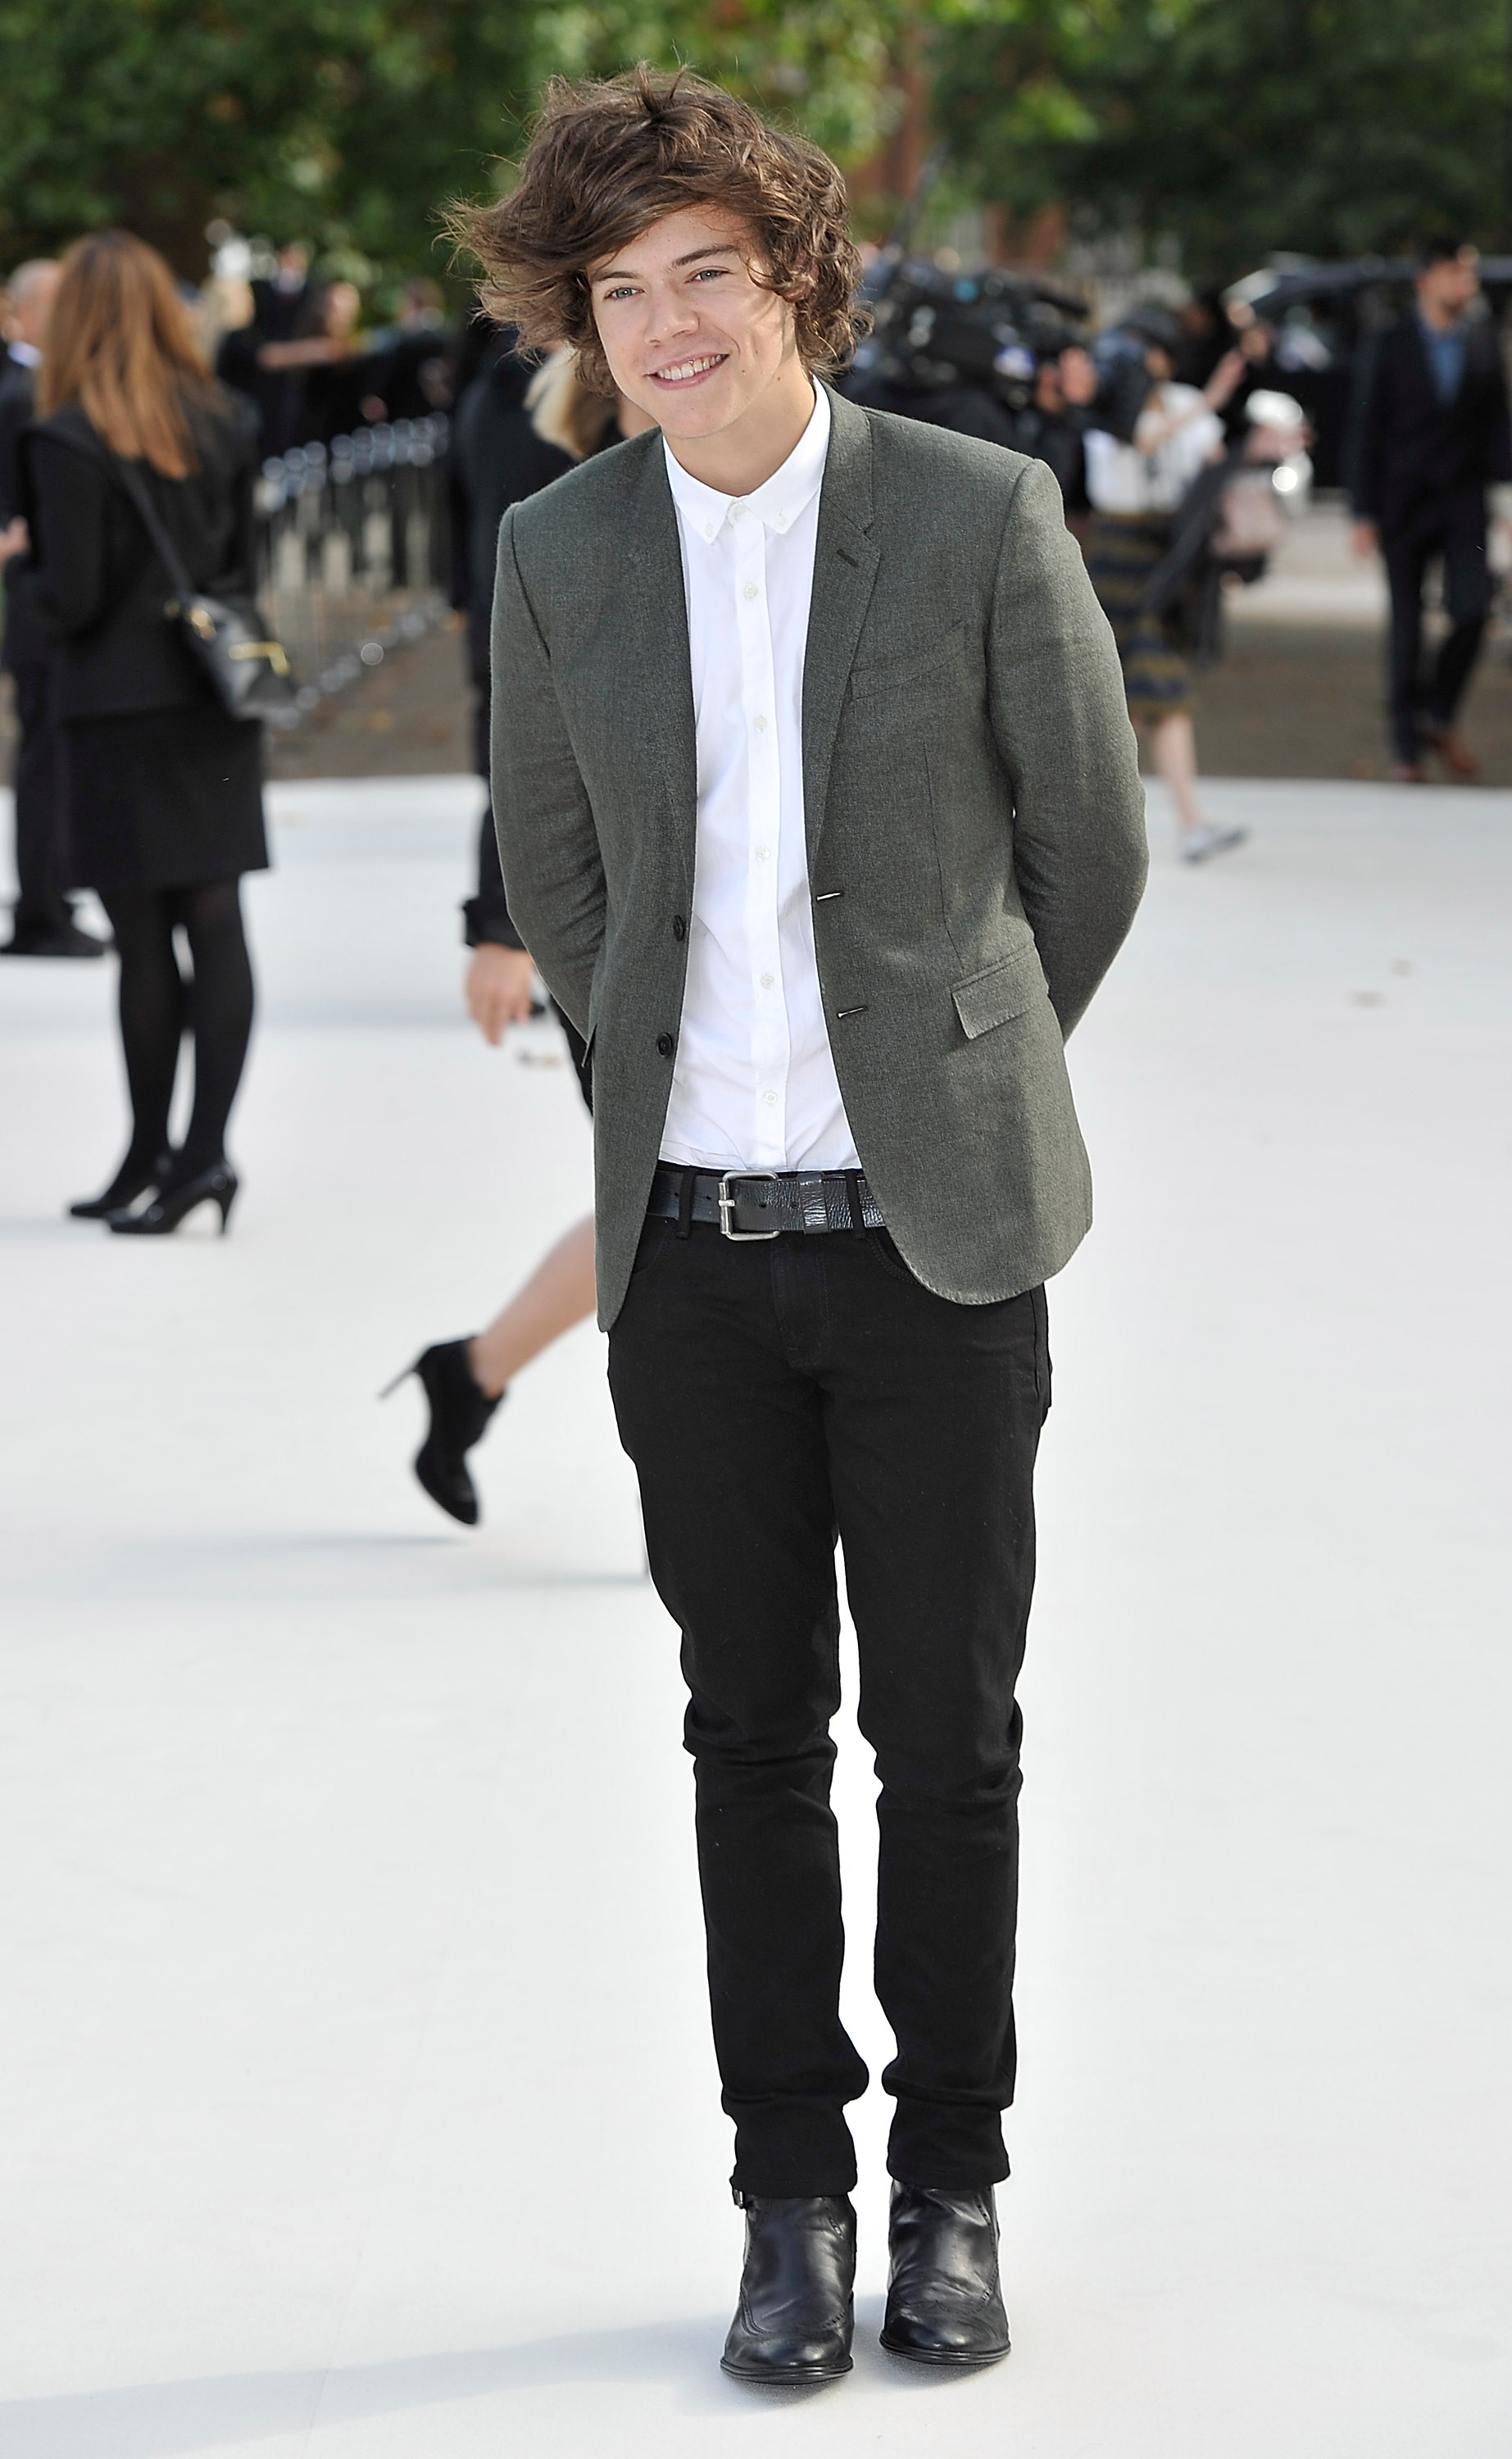 Harry Styles' Style. As a young man, and as is the case for…